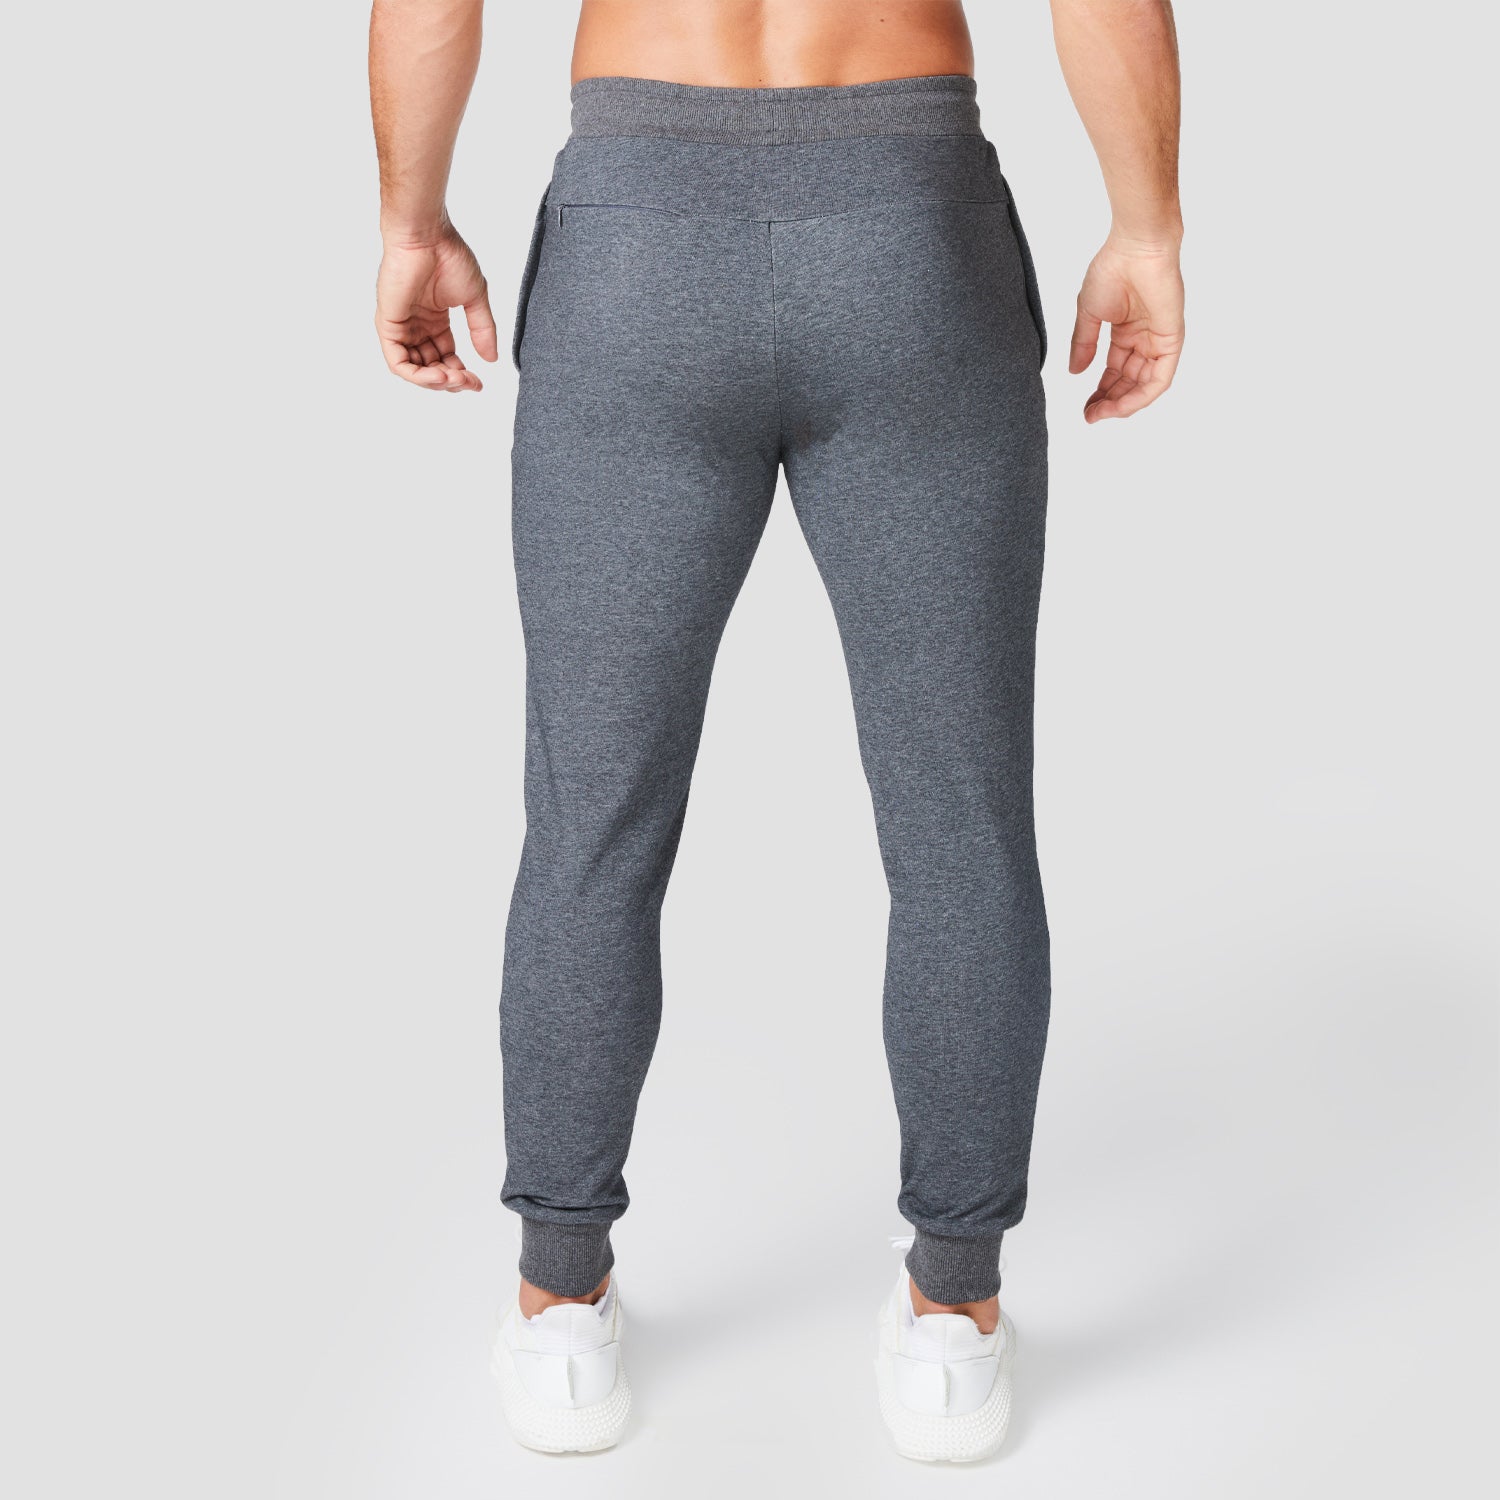 squatwolf-gym-wear-core-cuffed-joggers-charcoal-marl-workout-pants-for-men